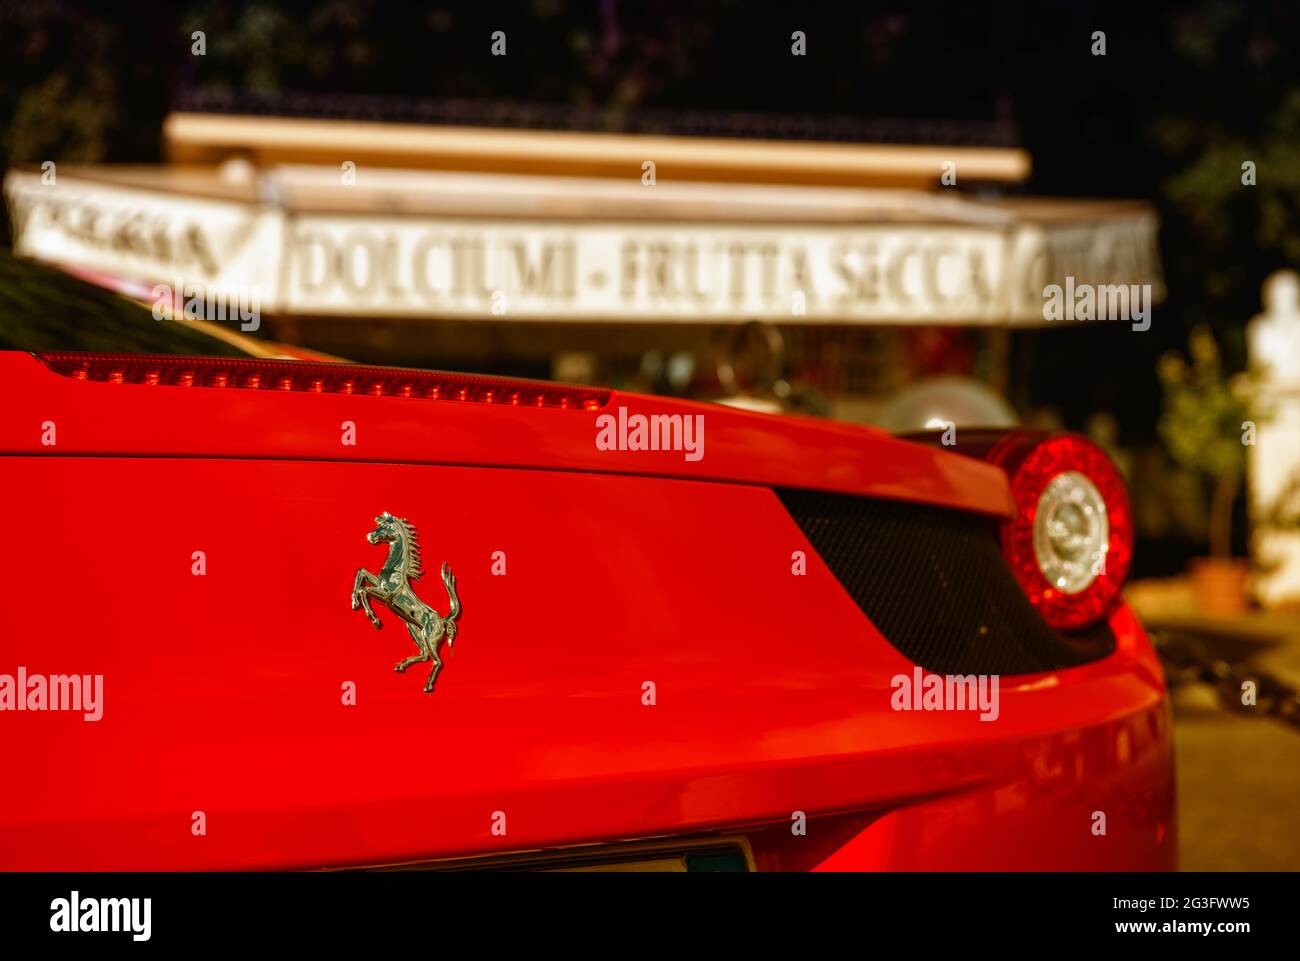 ROME - NOV 1: Red Ferrari shines at Gianicolo, November 1, 2012 in Rome. Ferrari has been noted for its continued participation Stock Photo